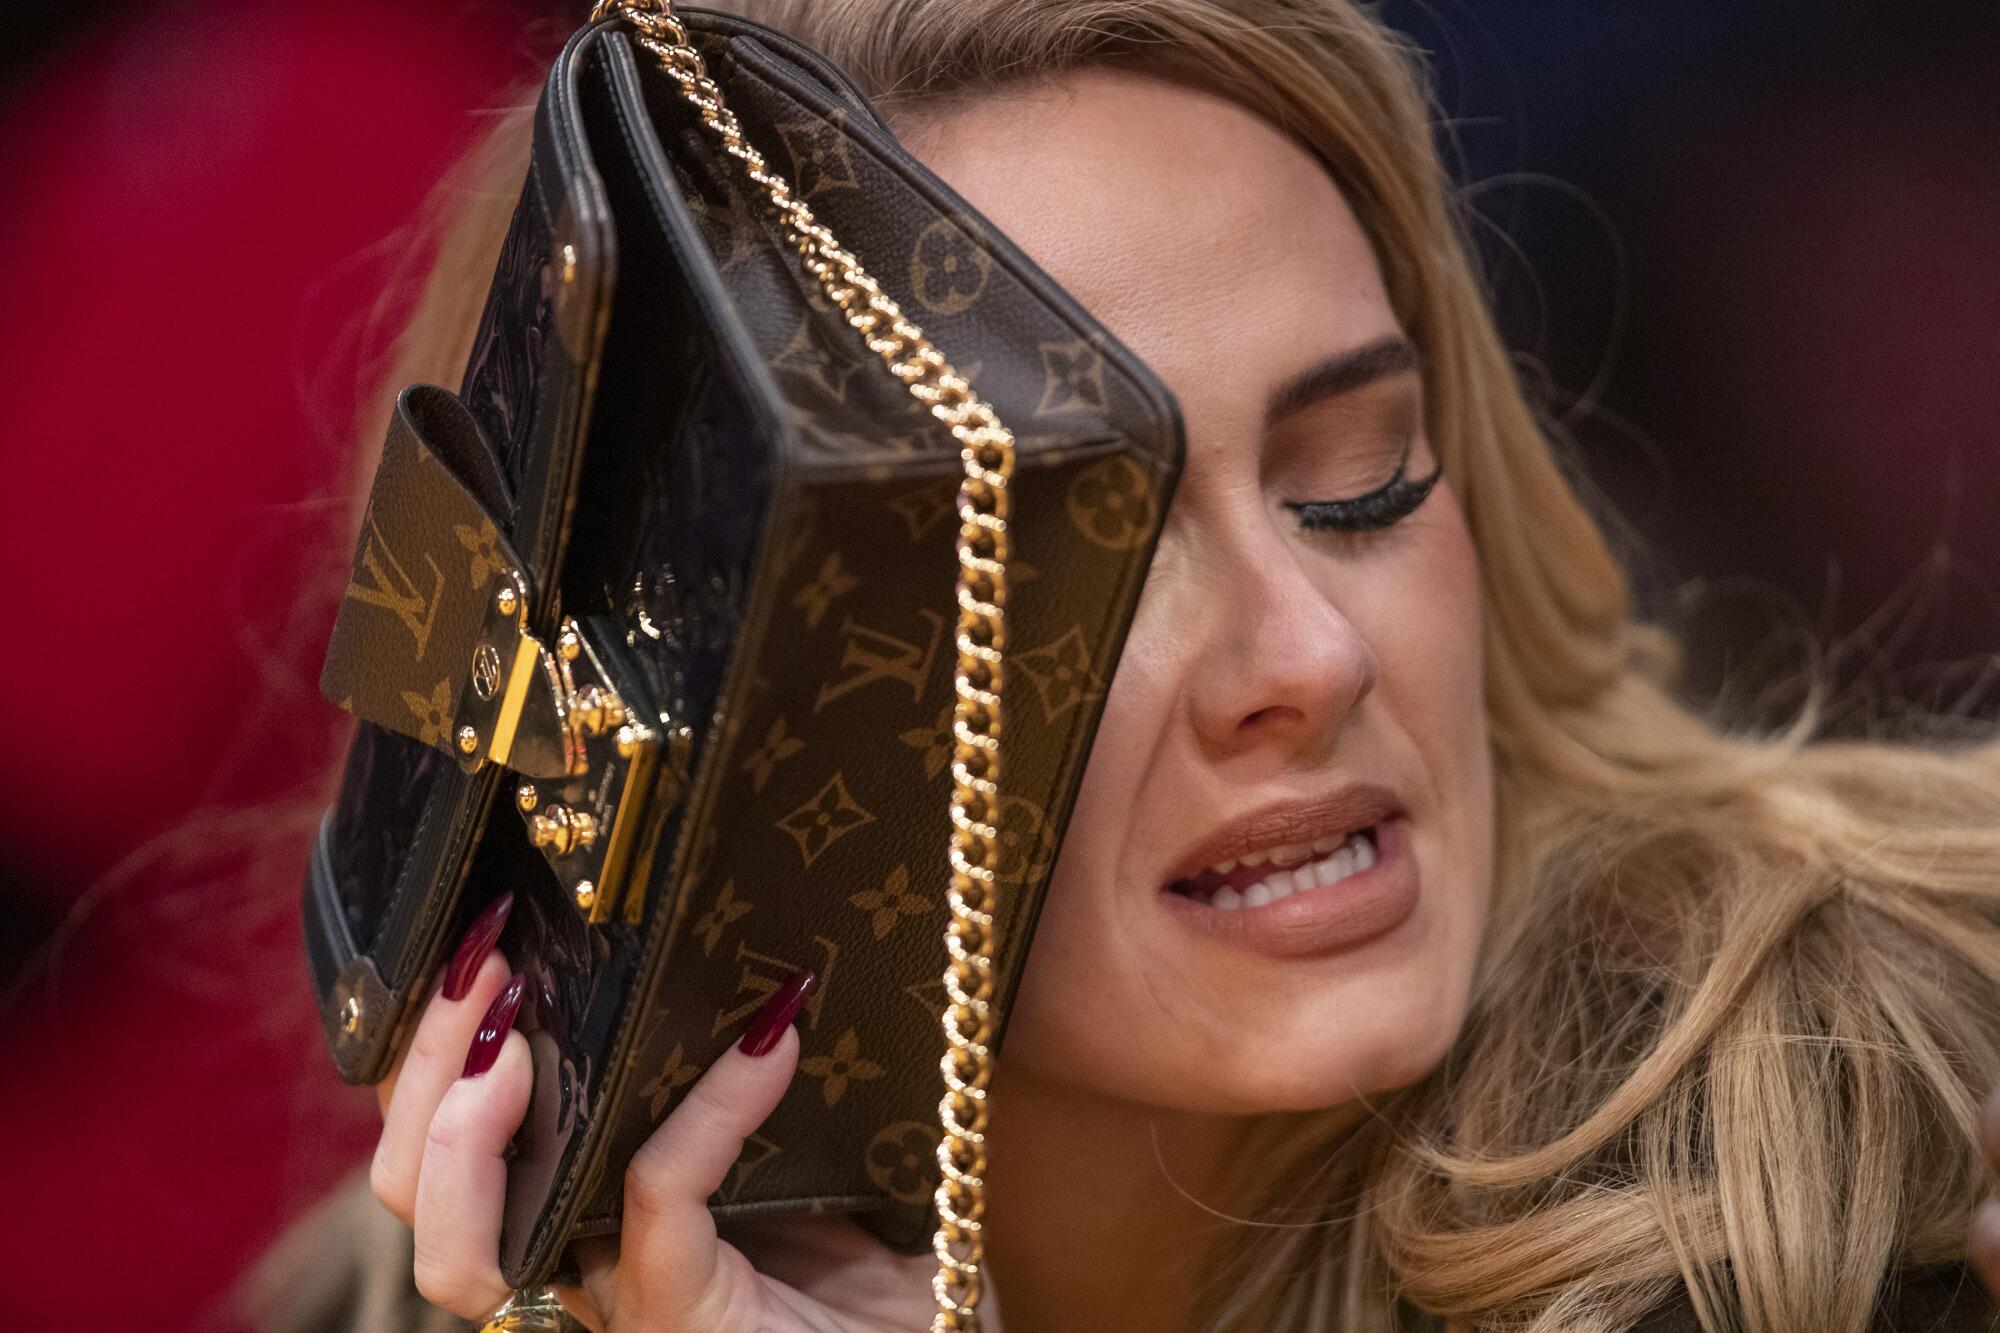 A woman hold up a purse with a gold chain to her face
